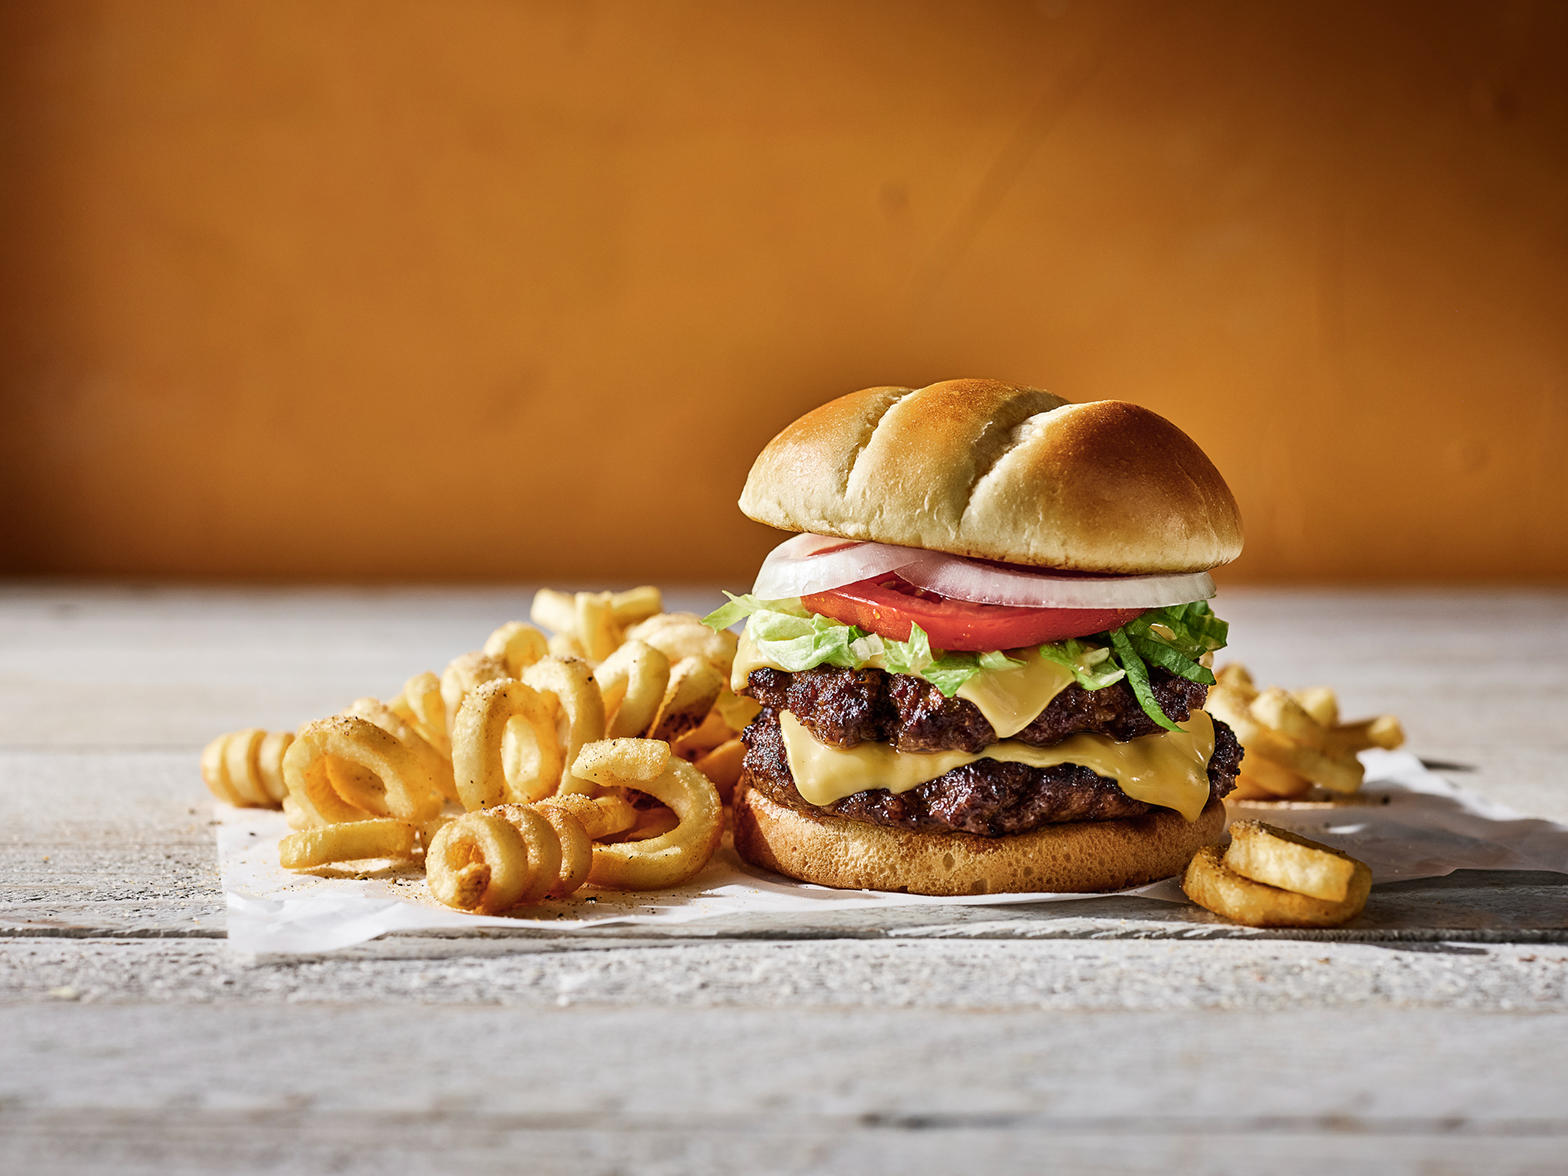 Hooters Build Your Own Burger and Curly Fries.